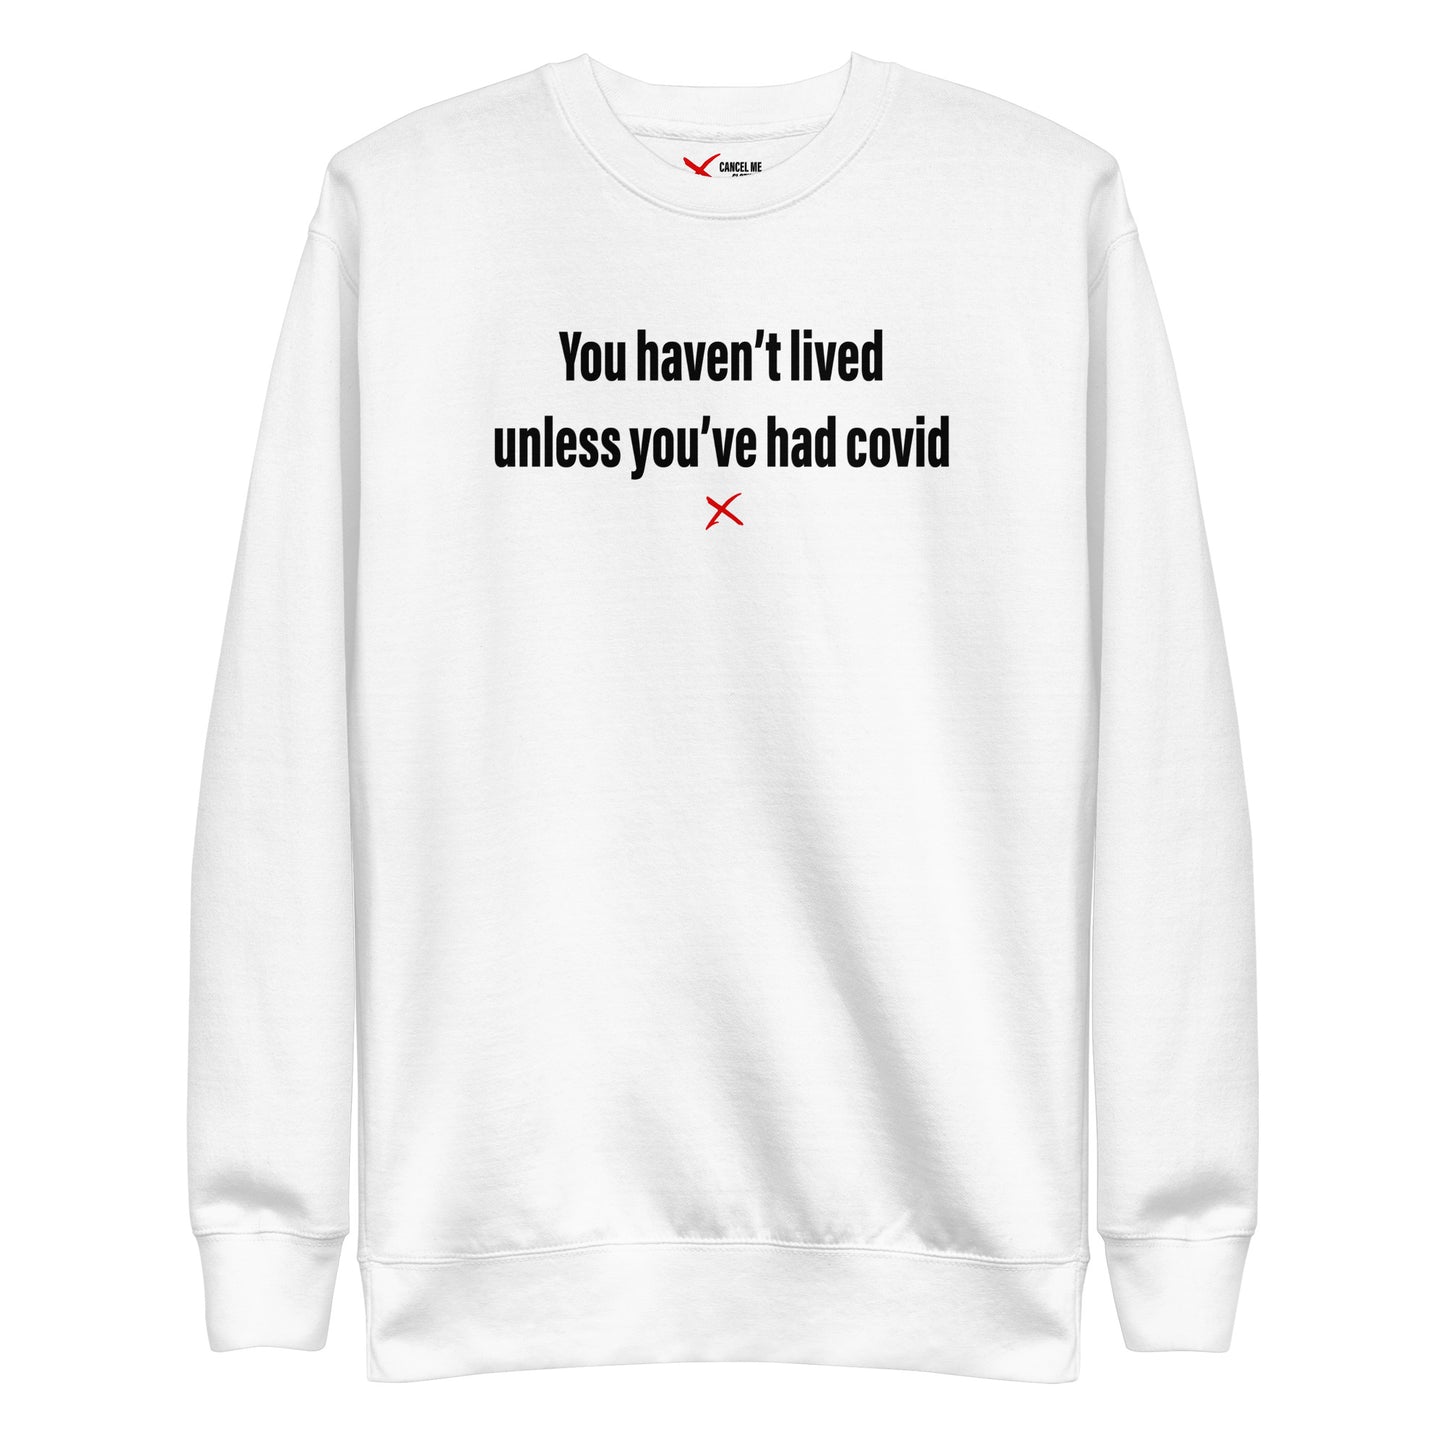 You haven't lived unless you've had covid - Sweatshirt